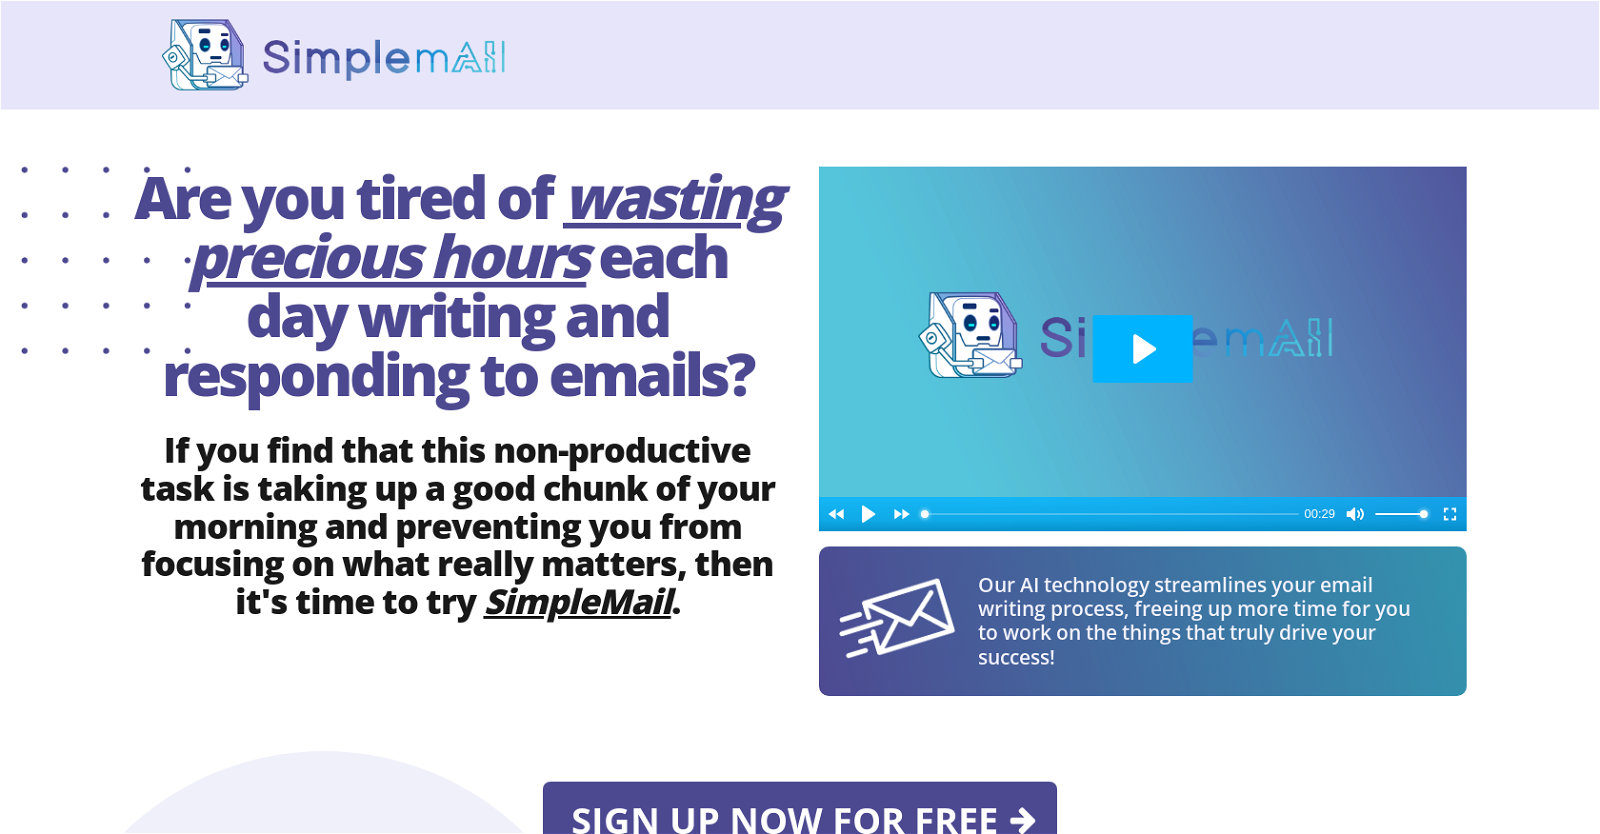 SimpleMail website